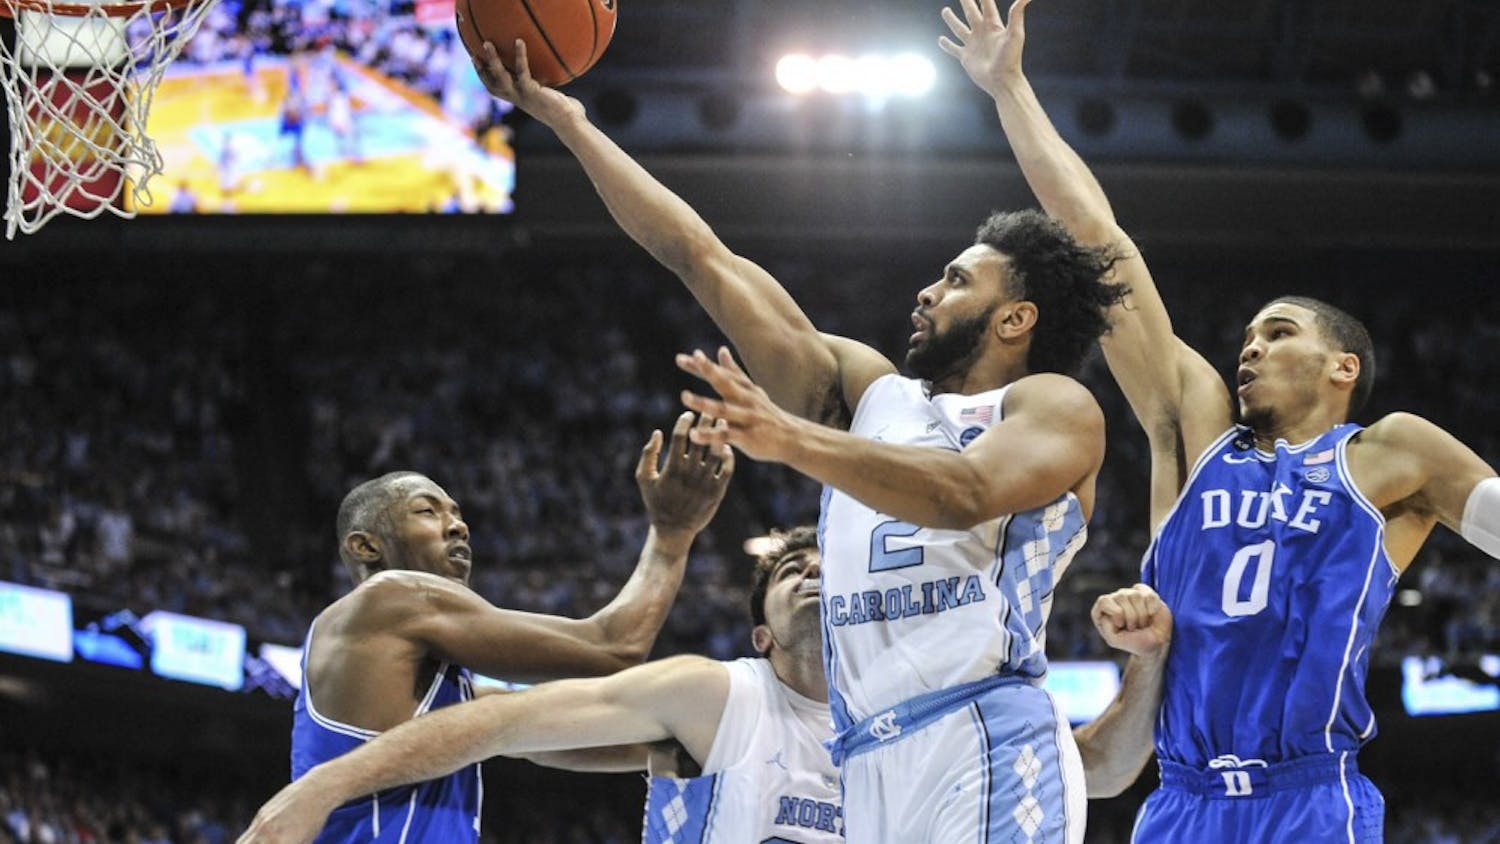 North Carolina guard Joel Berry (2) goes up for a shot in No. 5 UNC’s 90-83 win over No. 17 Duke on March 4th in the Smith Center. Berry finished with a team-high 28 points and five made 3-pointers.